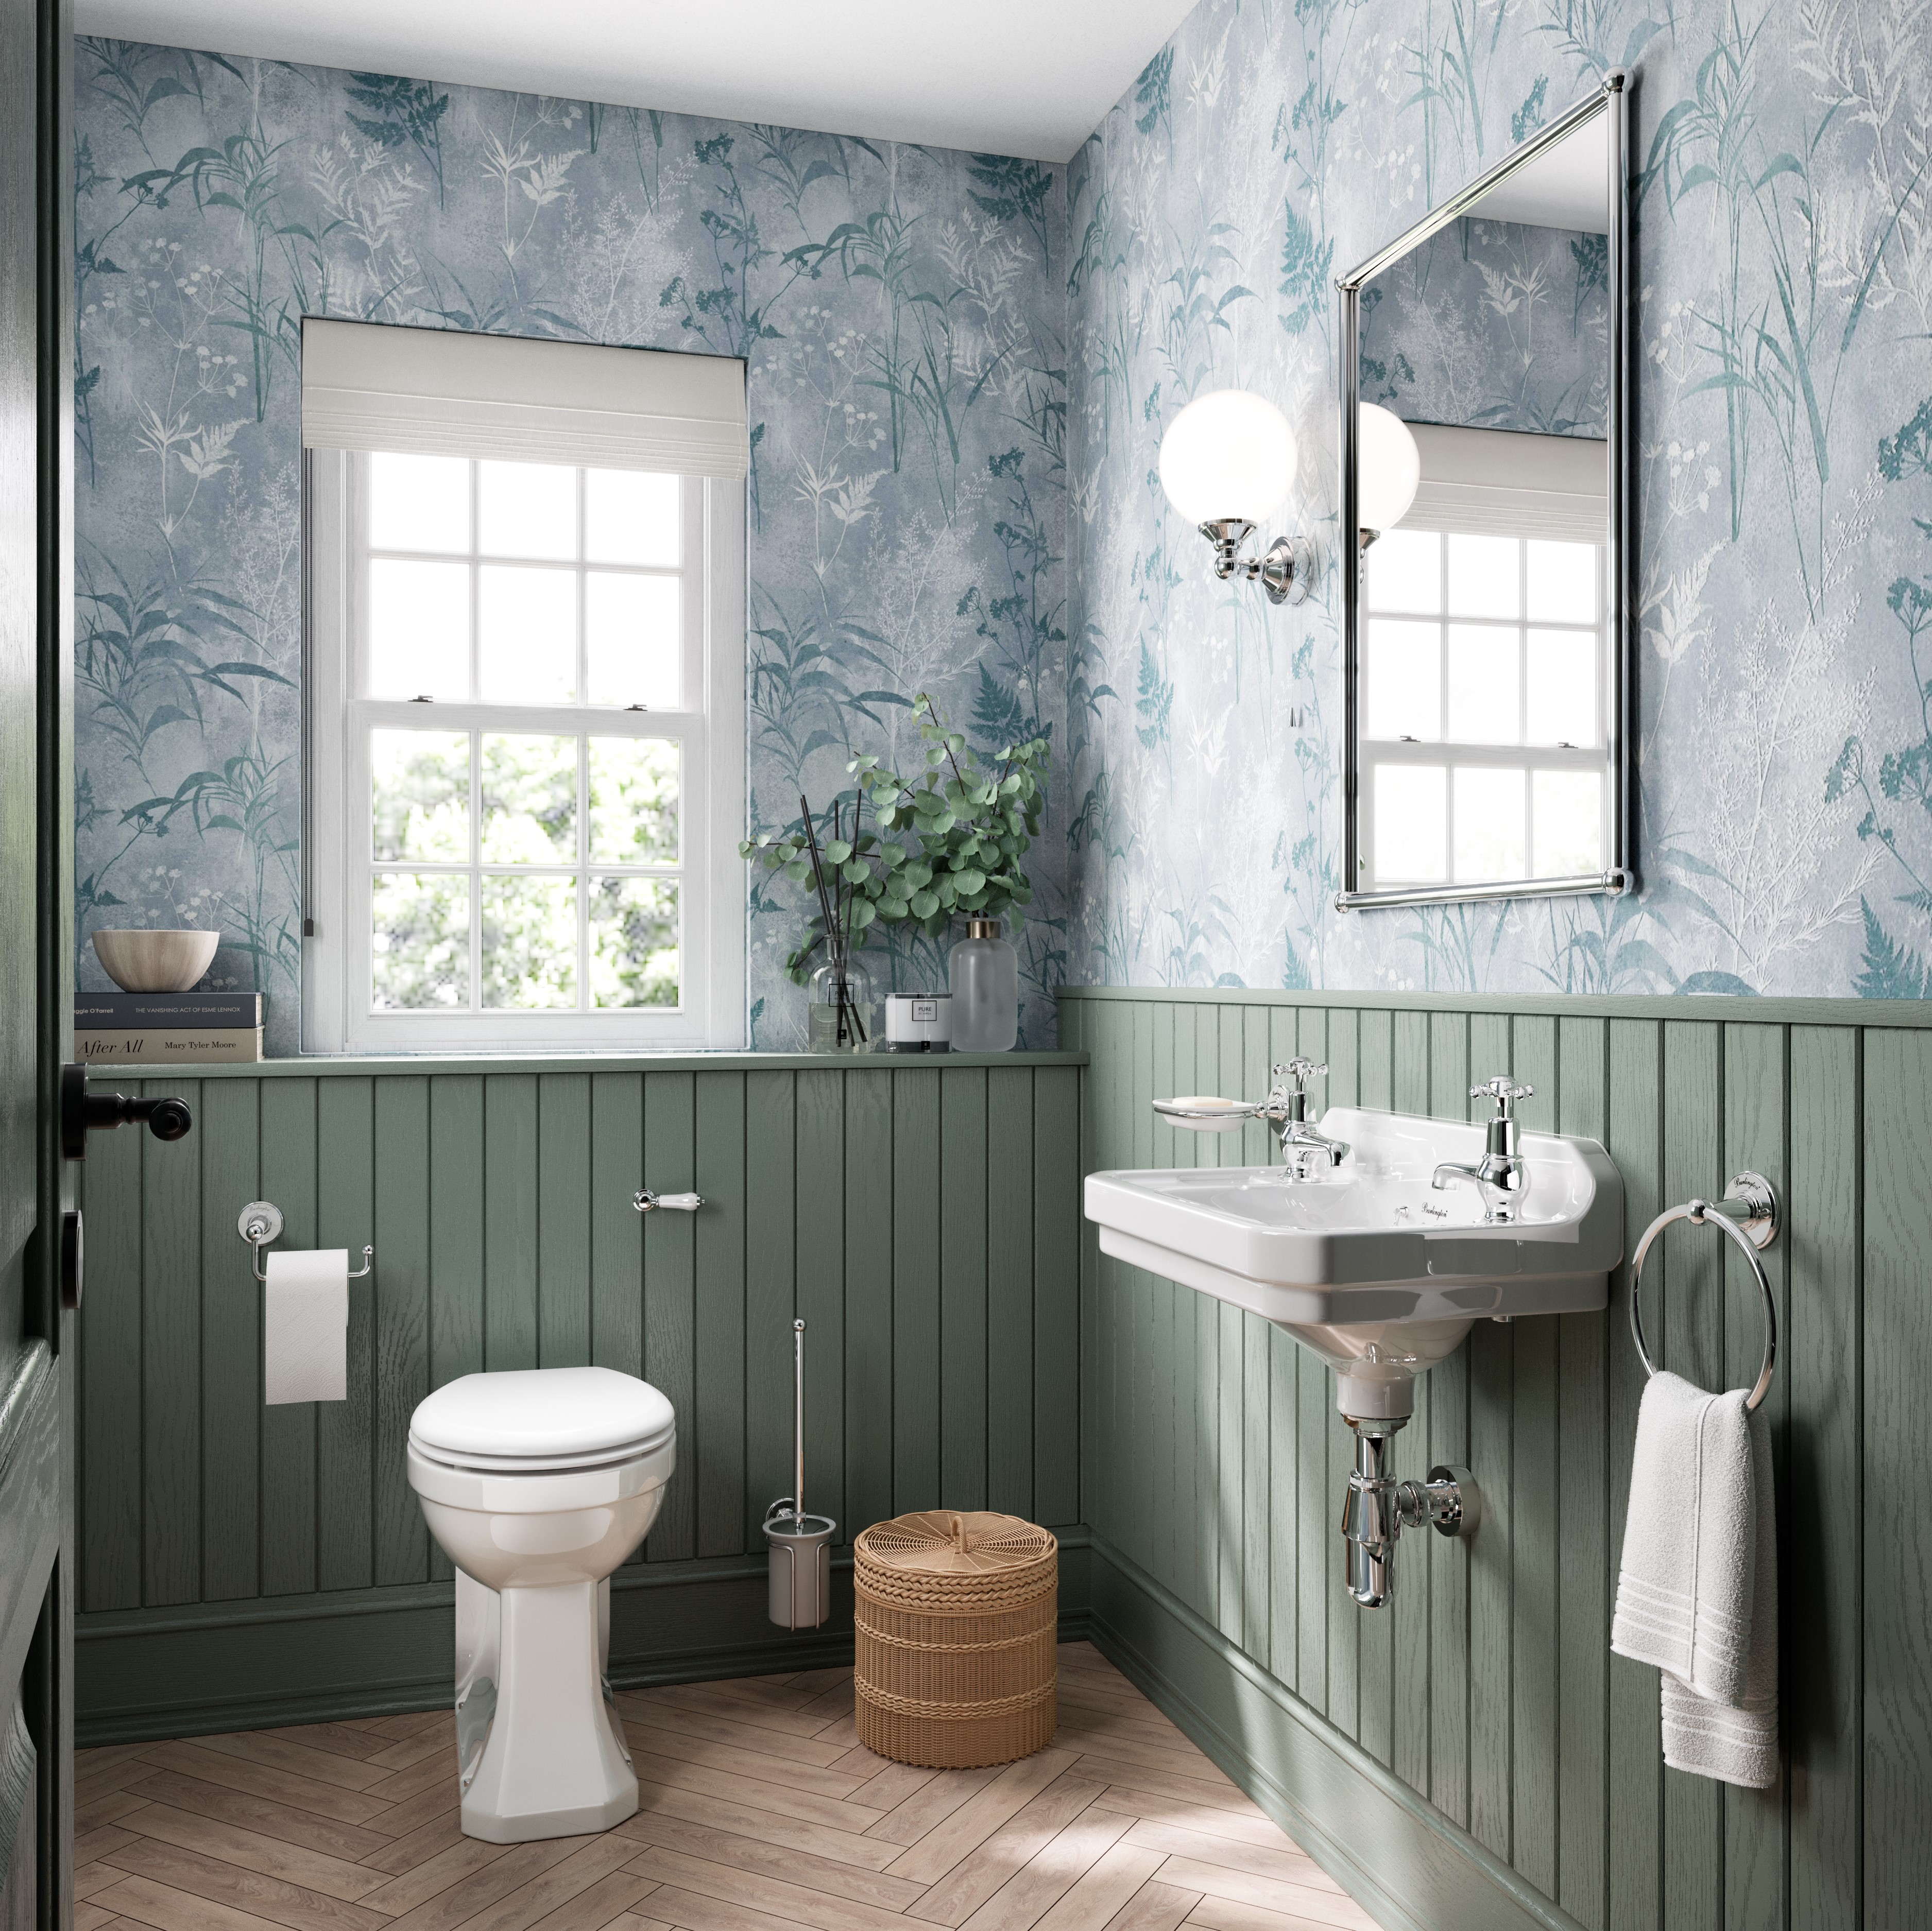 Modern Country Style: Cabbages and Roses Hatley Wallpaper In A SMALL Modern  Country Cloakroom!